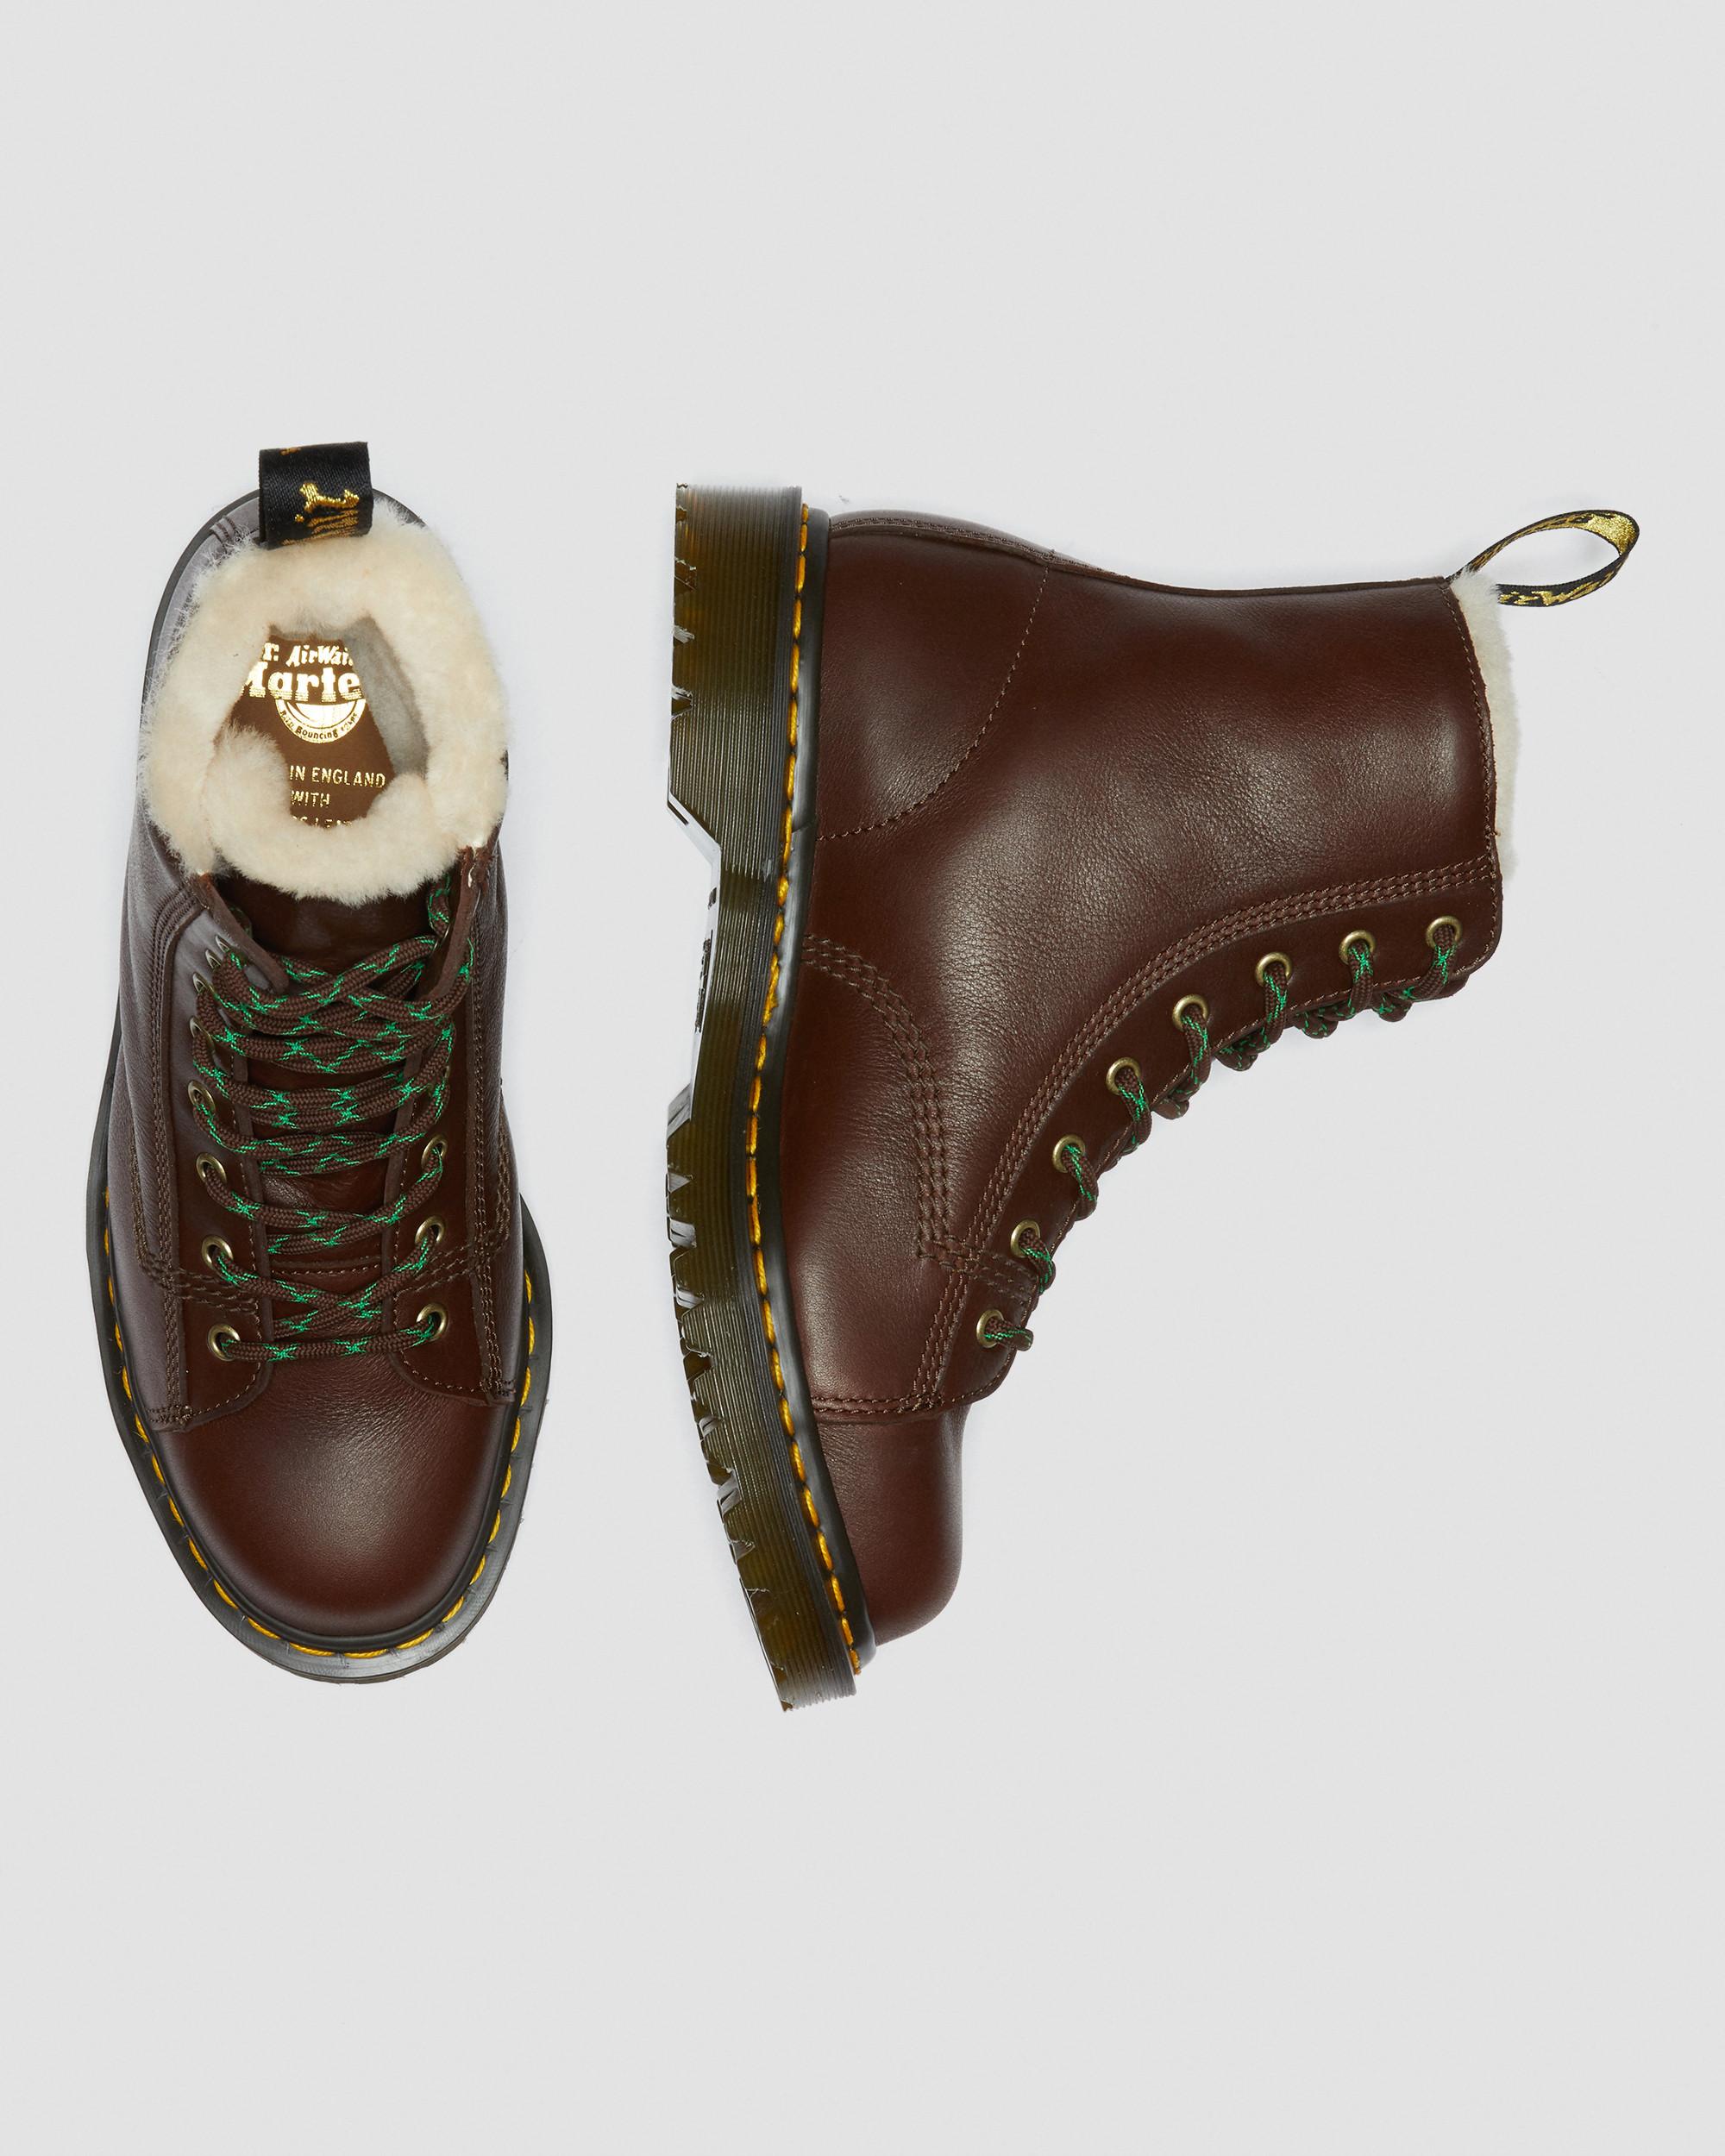 Barton Shearling Lined Brown Leather Ankle BootsBarton Shearling Lined Leather Ankle Boots Dr. Martens